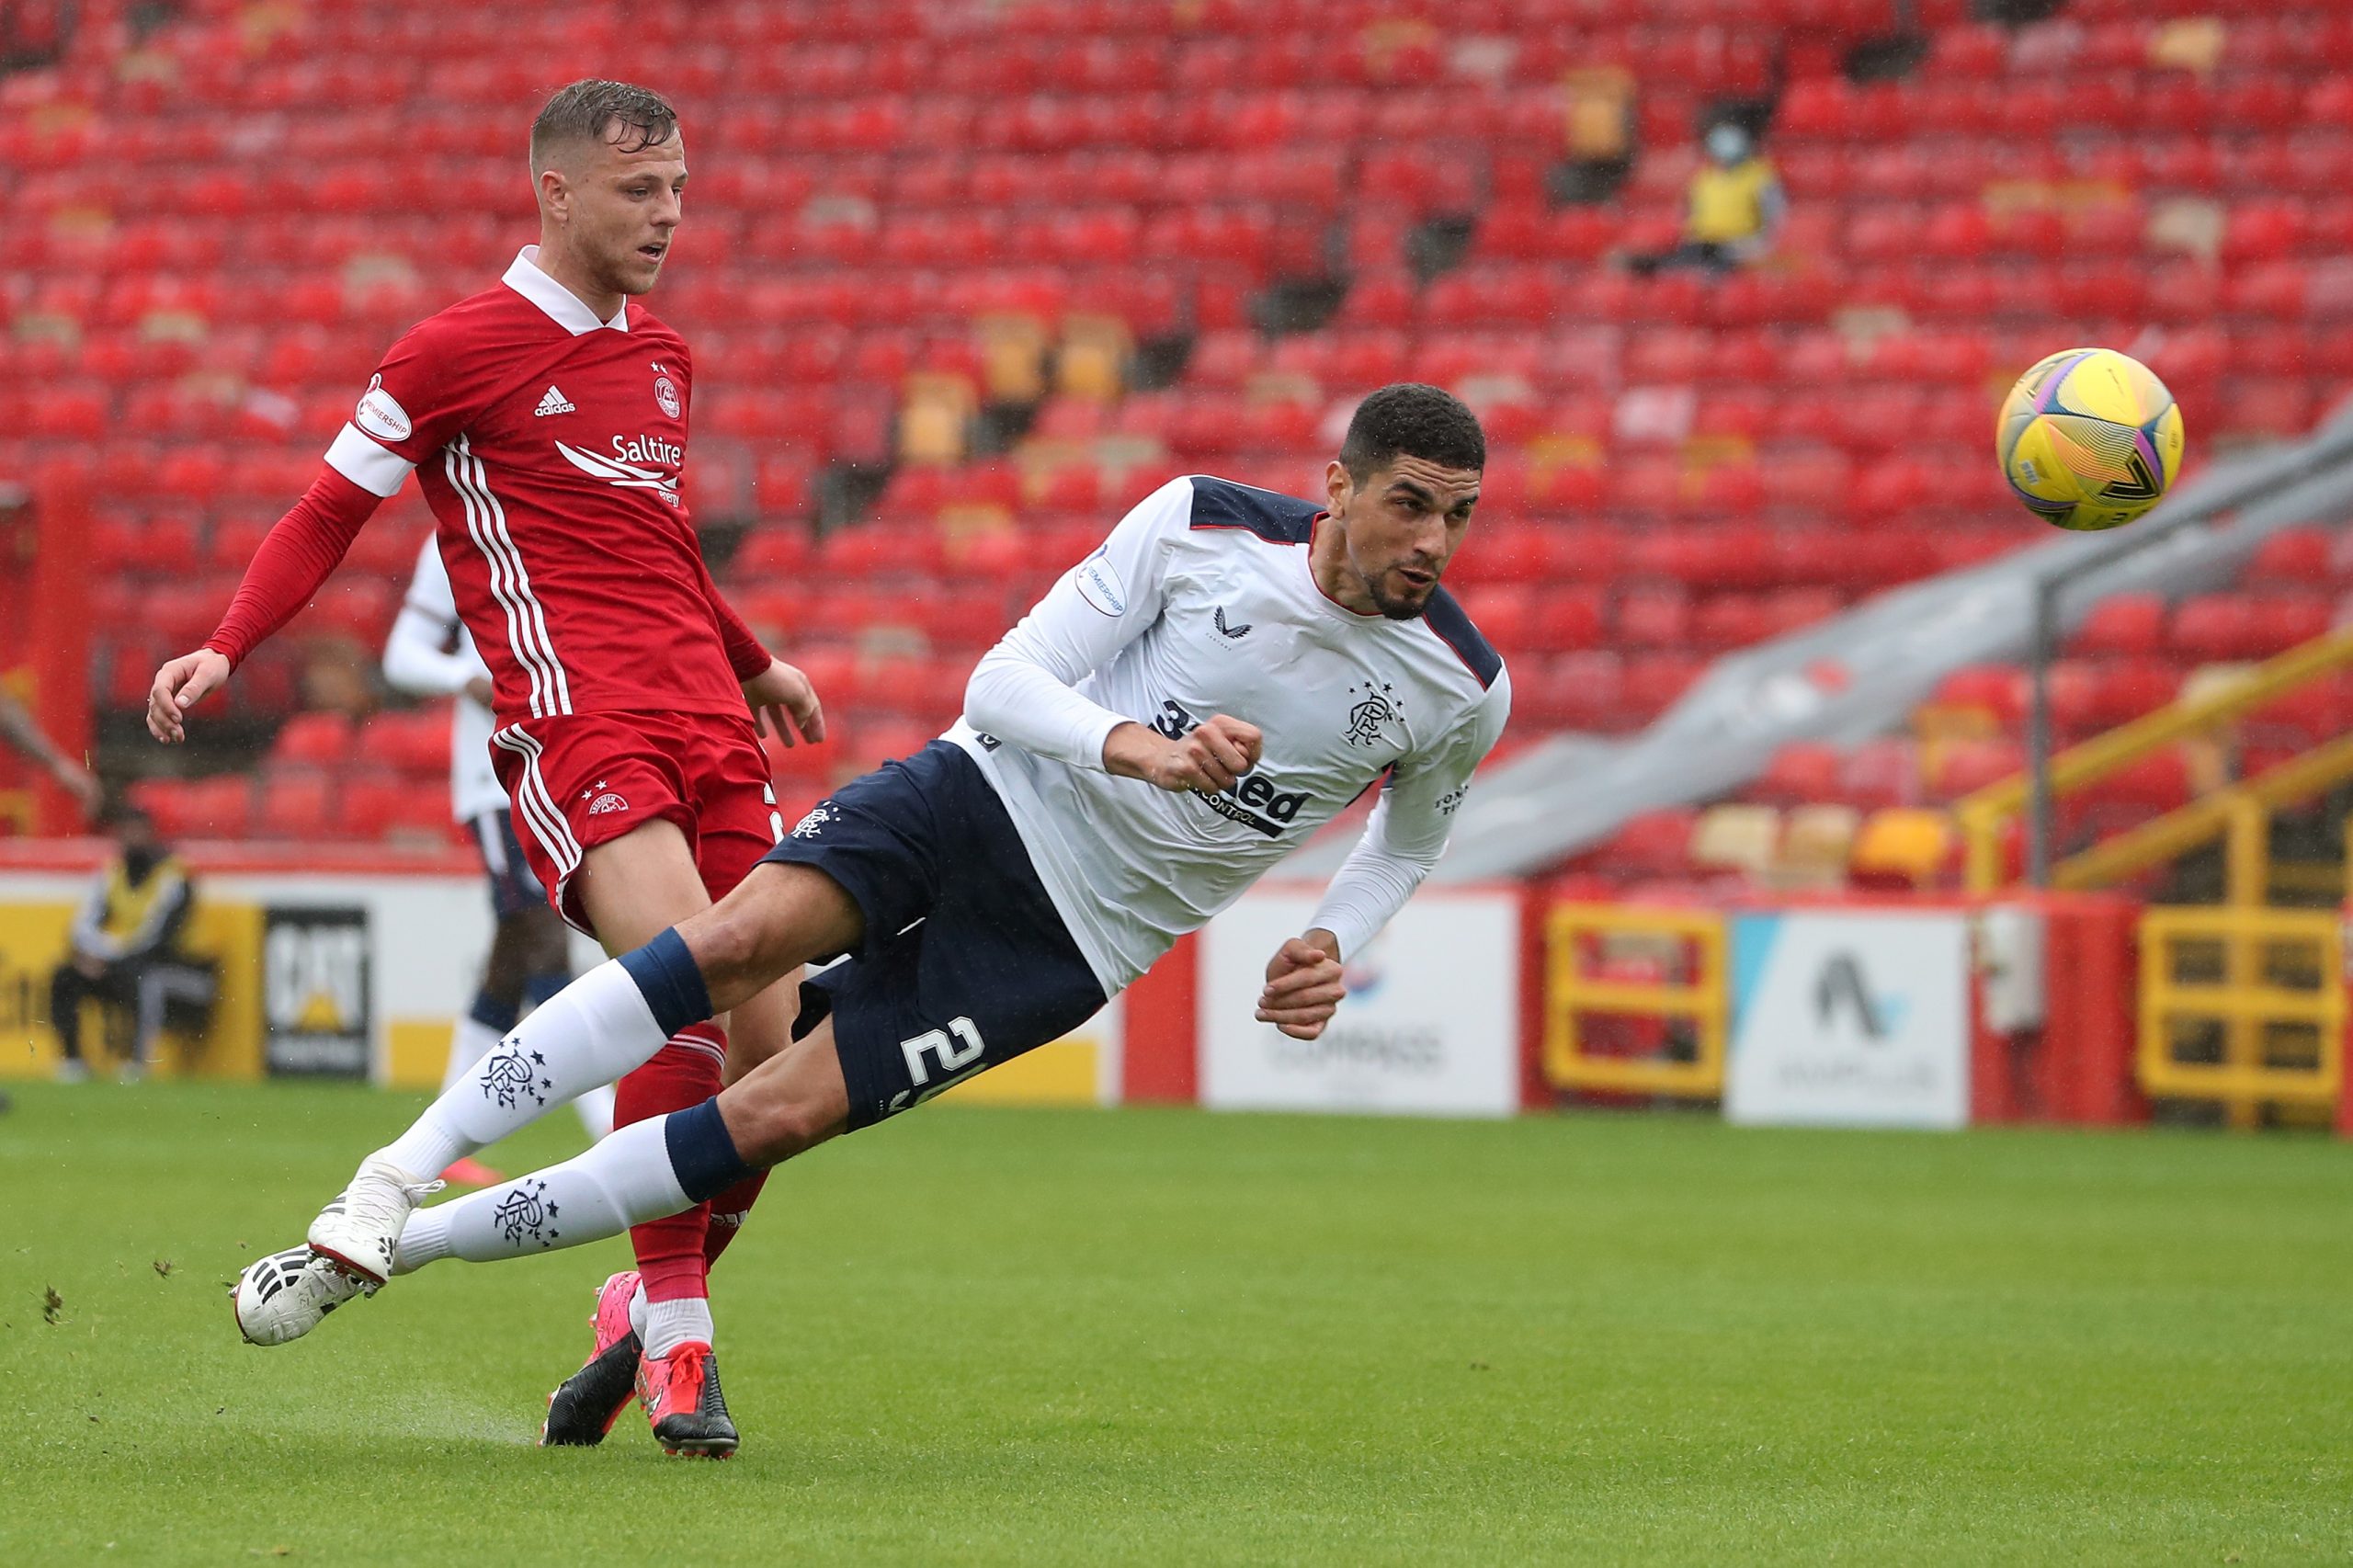 Aberdeen's Bruce Anderson (L) vies with Rangers' Leon Balogun during the Scottish Premier League football match between Aberdeen and Rangers at Pittodrie Stadium in Aberdeen, northeast Scotland, on August 1, 2020. (Photo by Andrew Milligan / POOL / AFP) (Photo by ANDREW MILLIGAN/POOL/AFP via Getty Images)